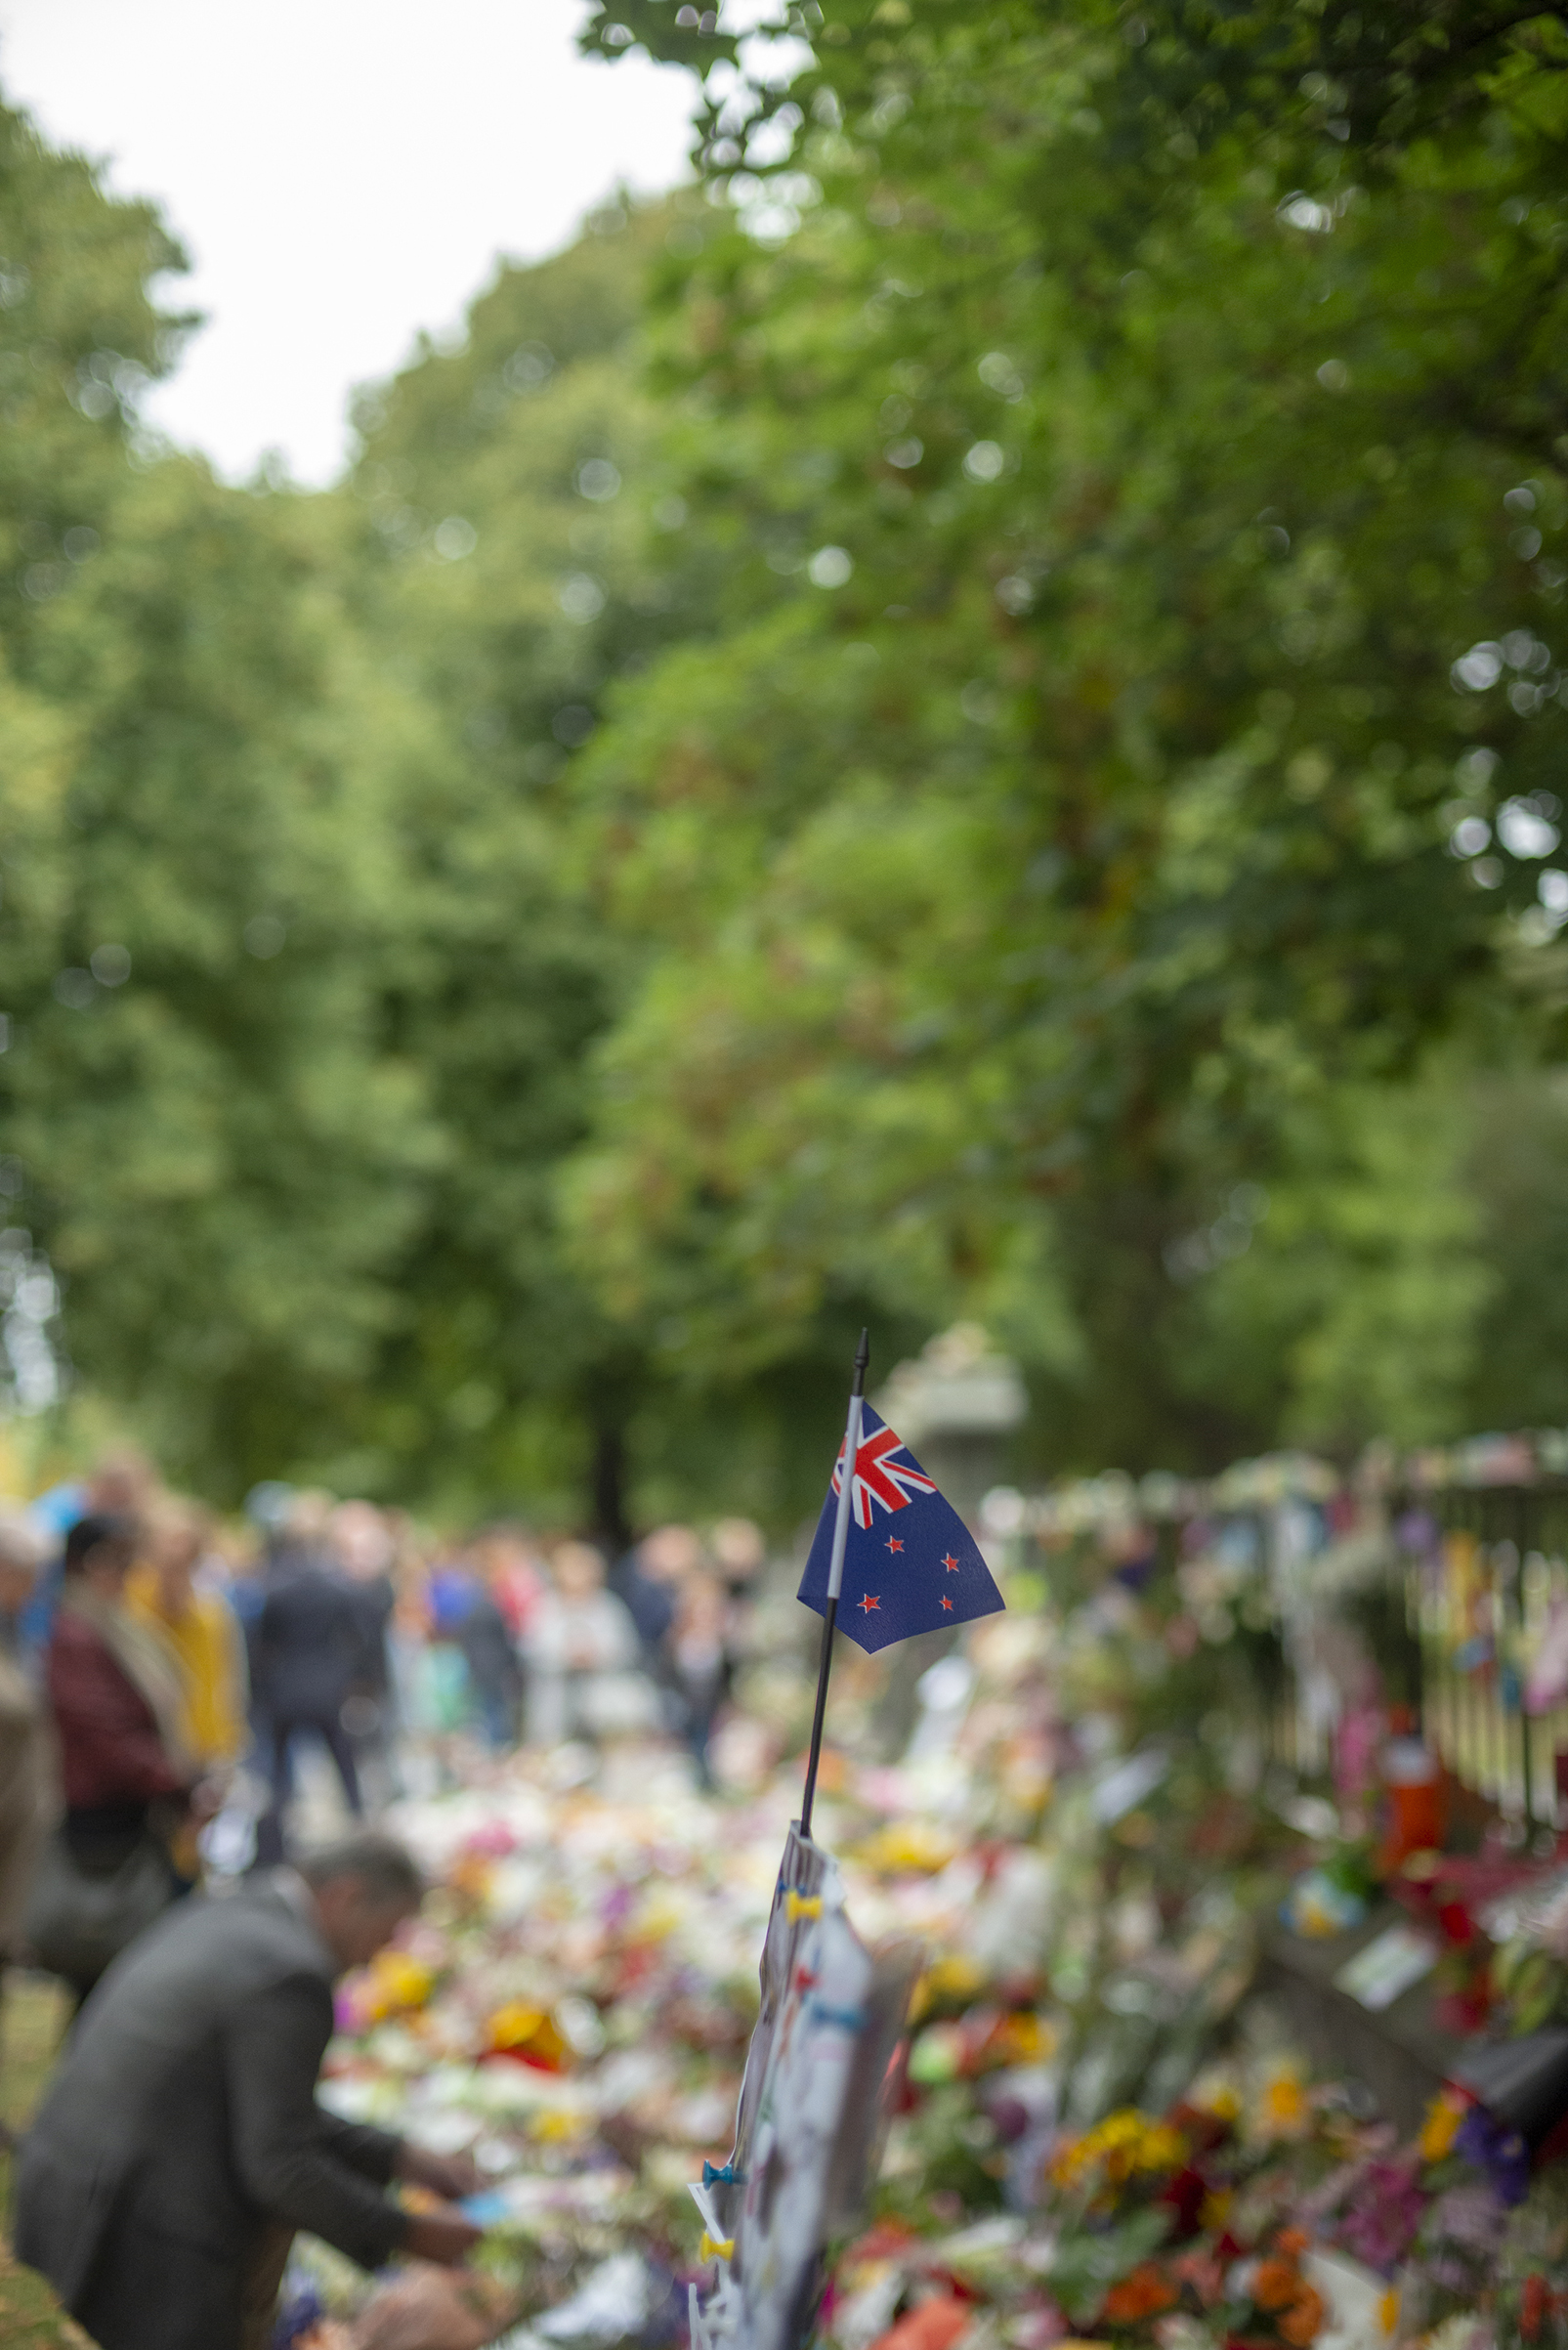 A New Zealand flag stand amidst the tributes to the shooting victims in Christchurch. (Virginia Woods-Jack for TIME)